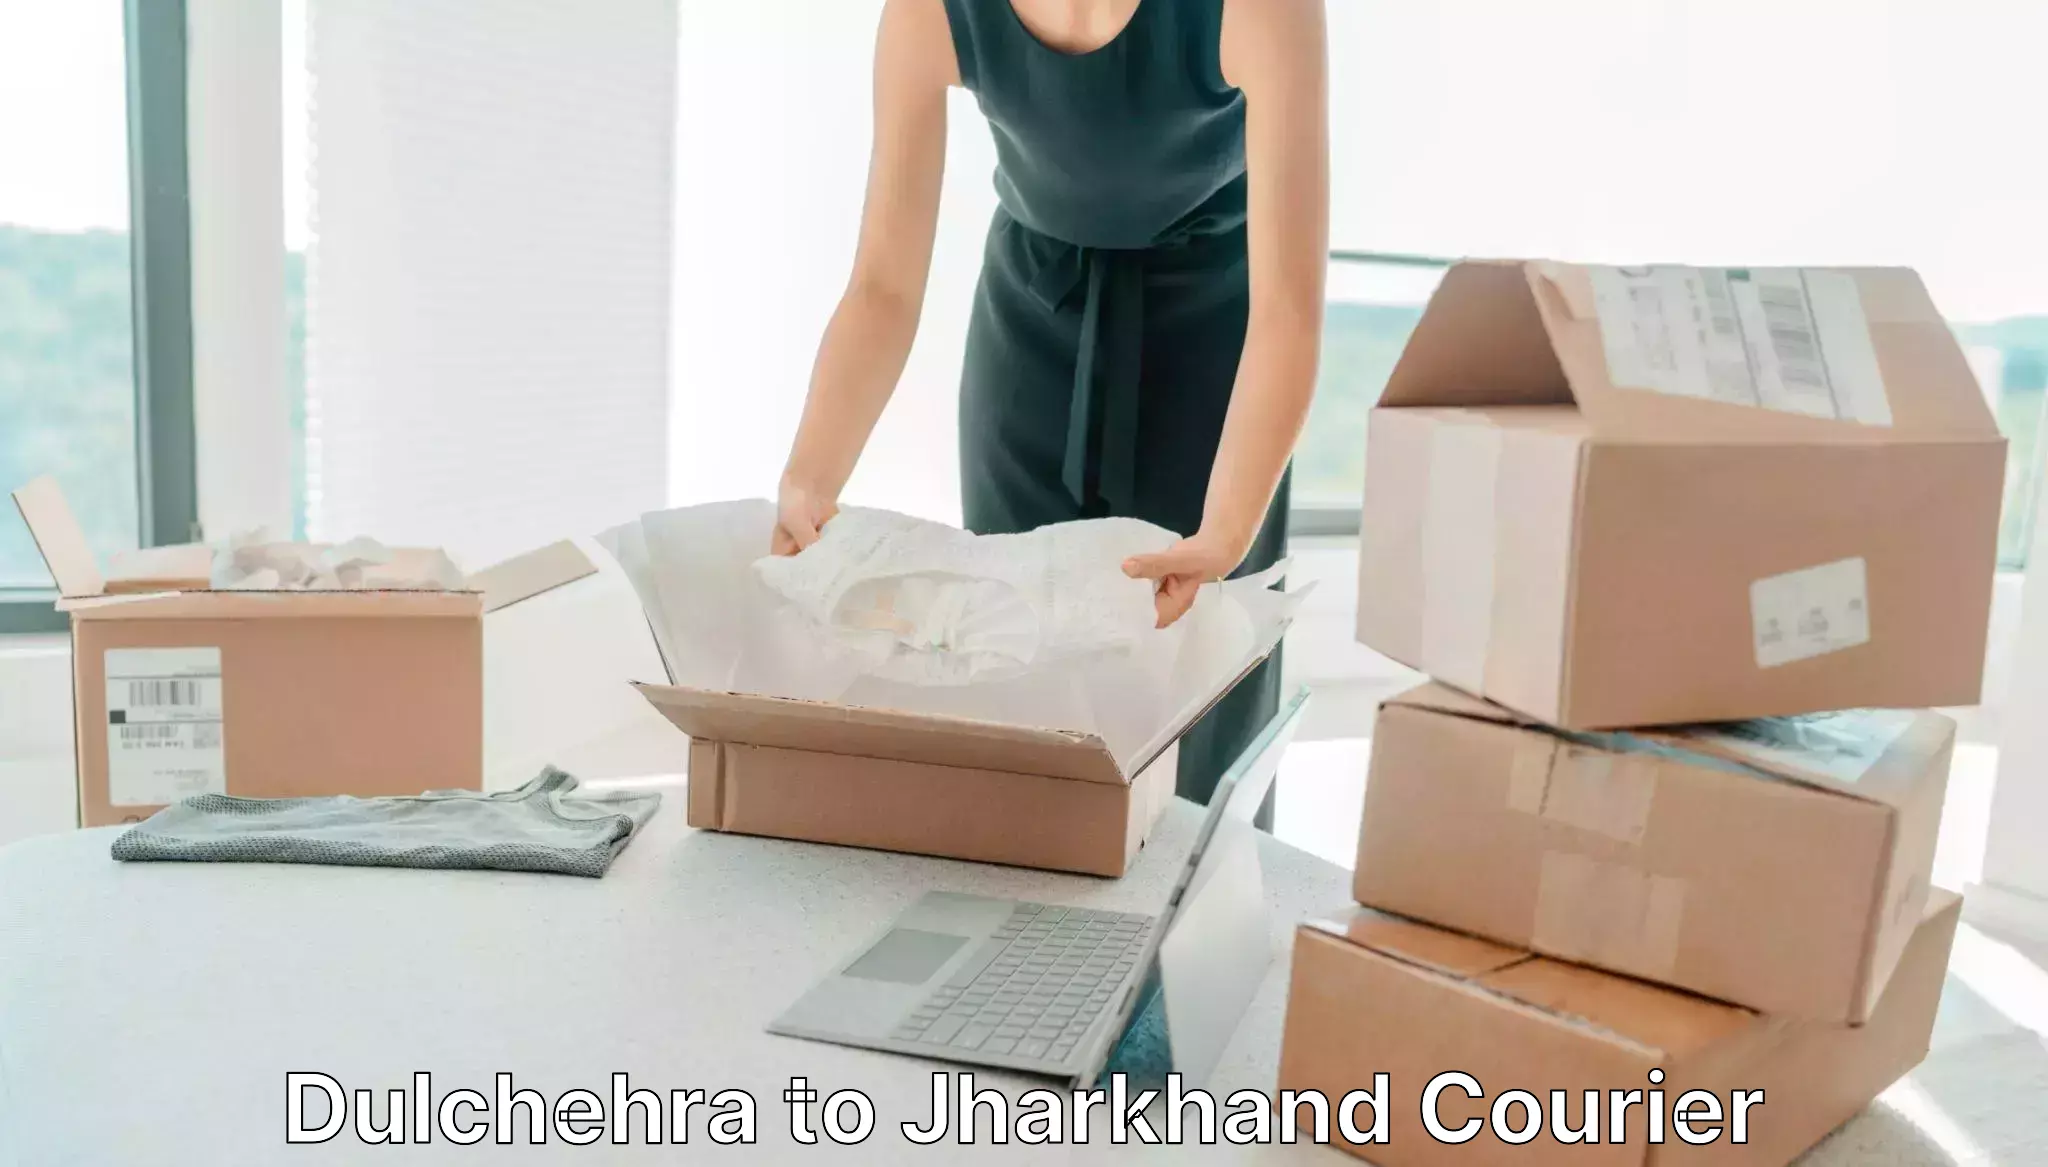 Global courier networks Dulchehra to Kedla